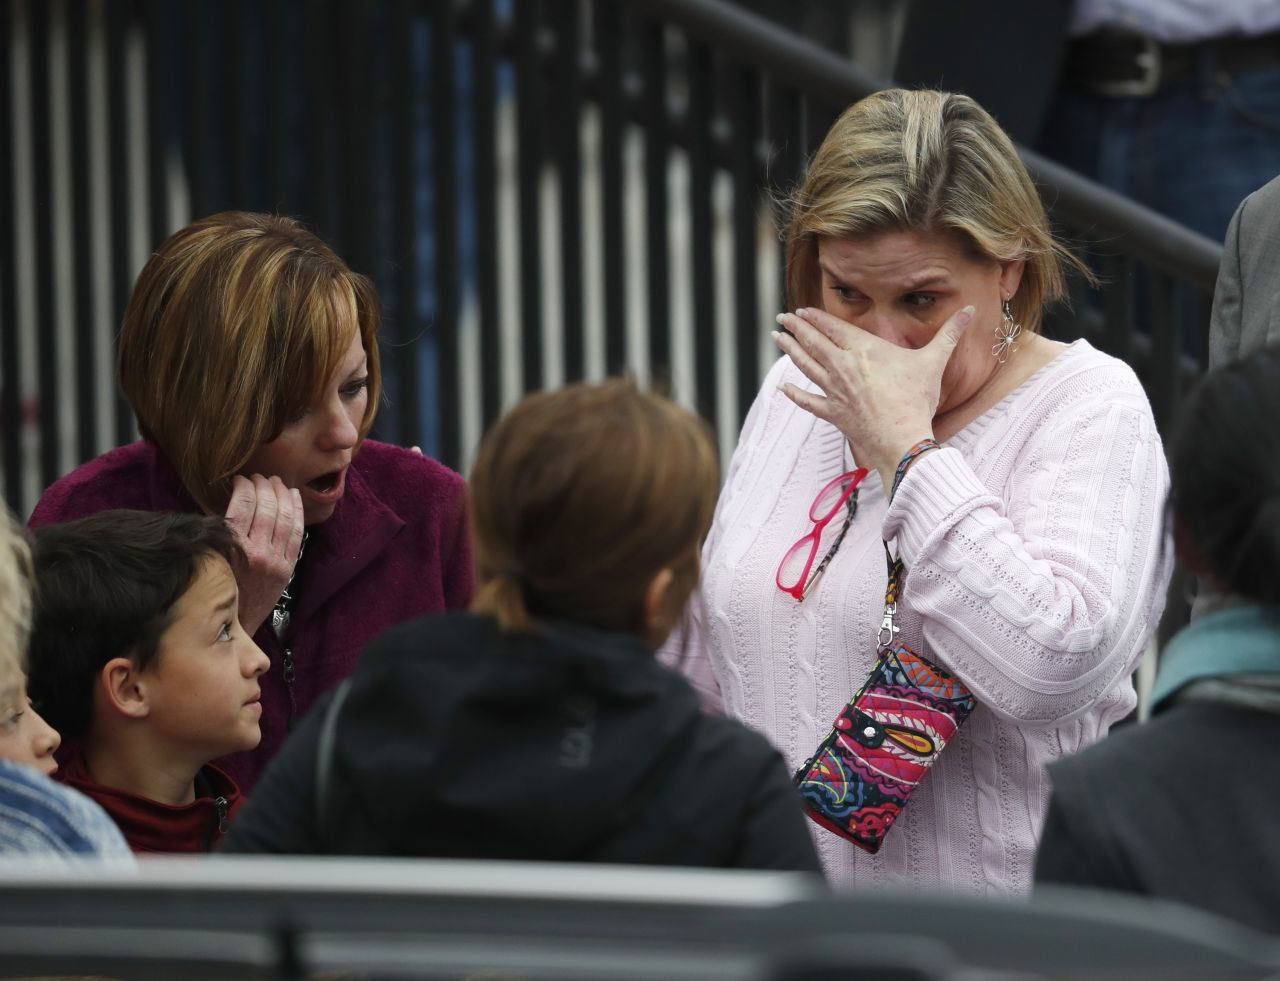 Parents fight back tears as they wait for their children at a recreation center.